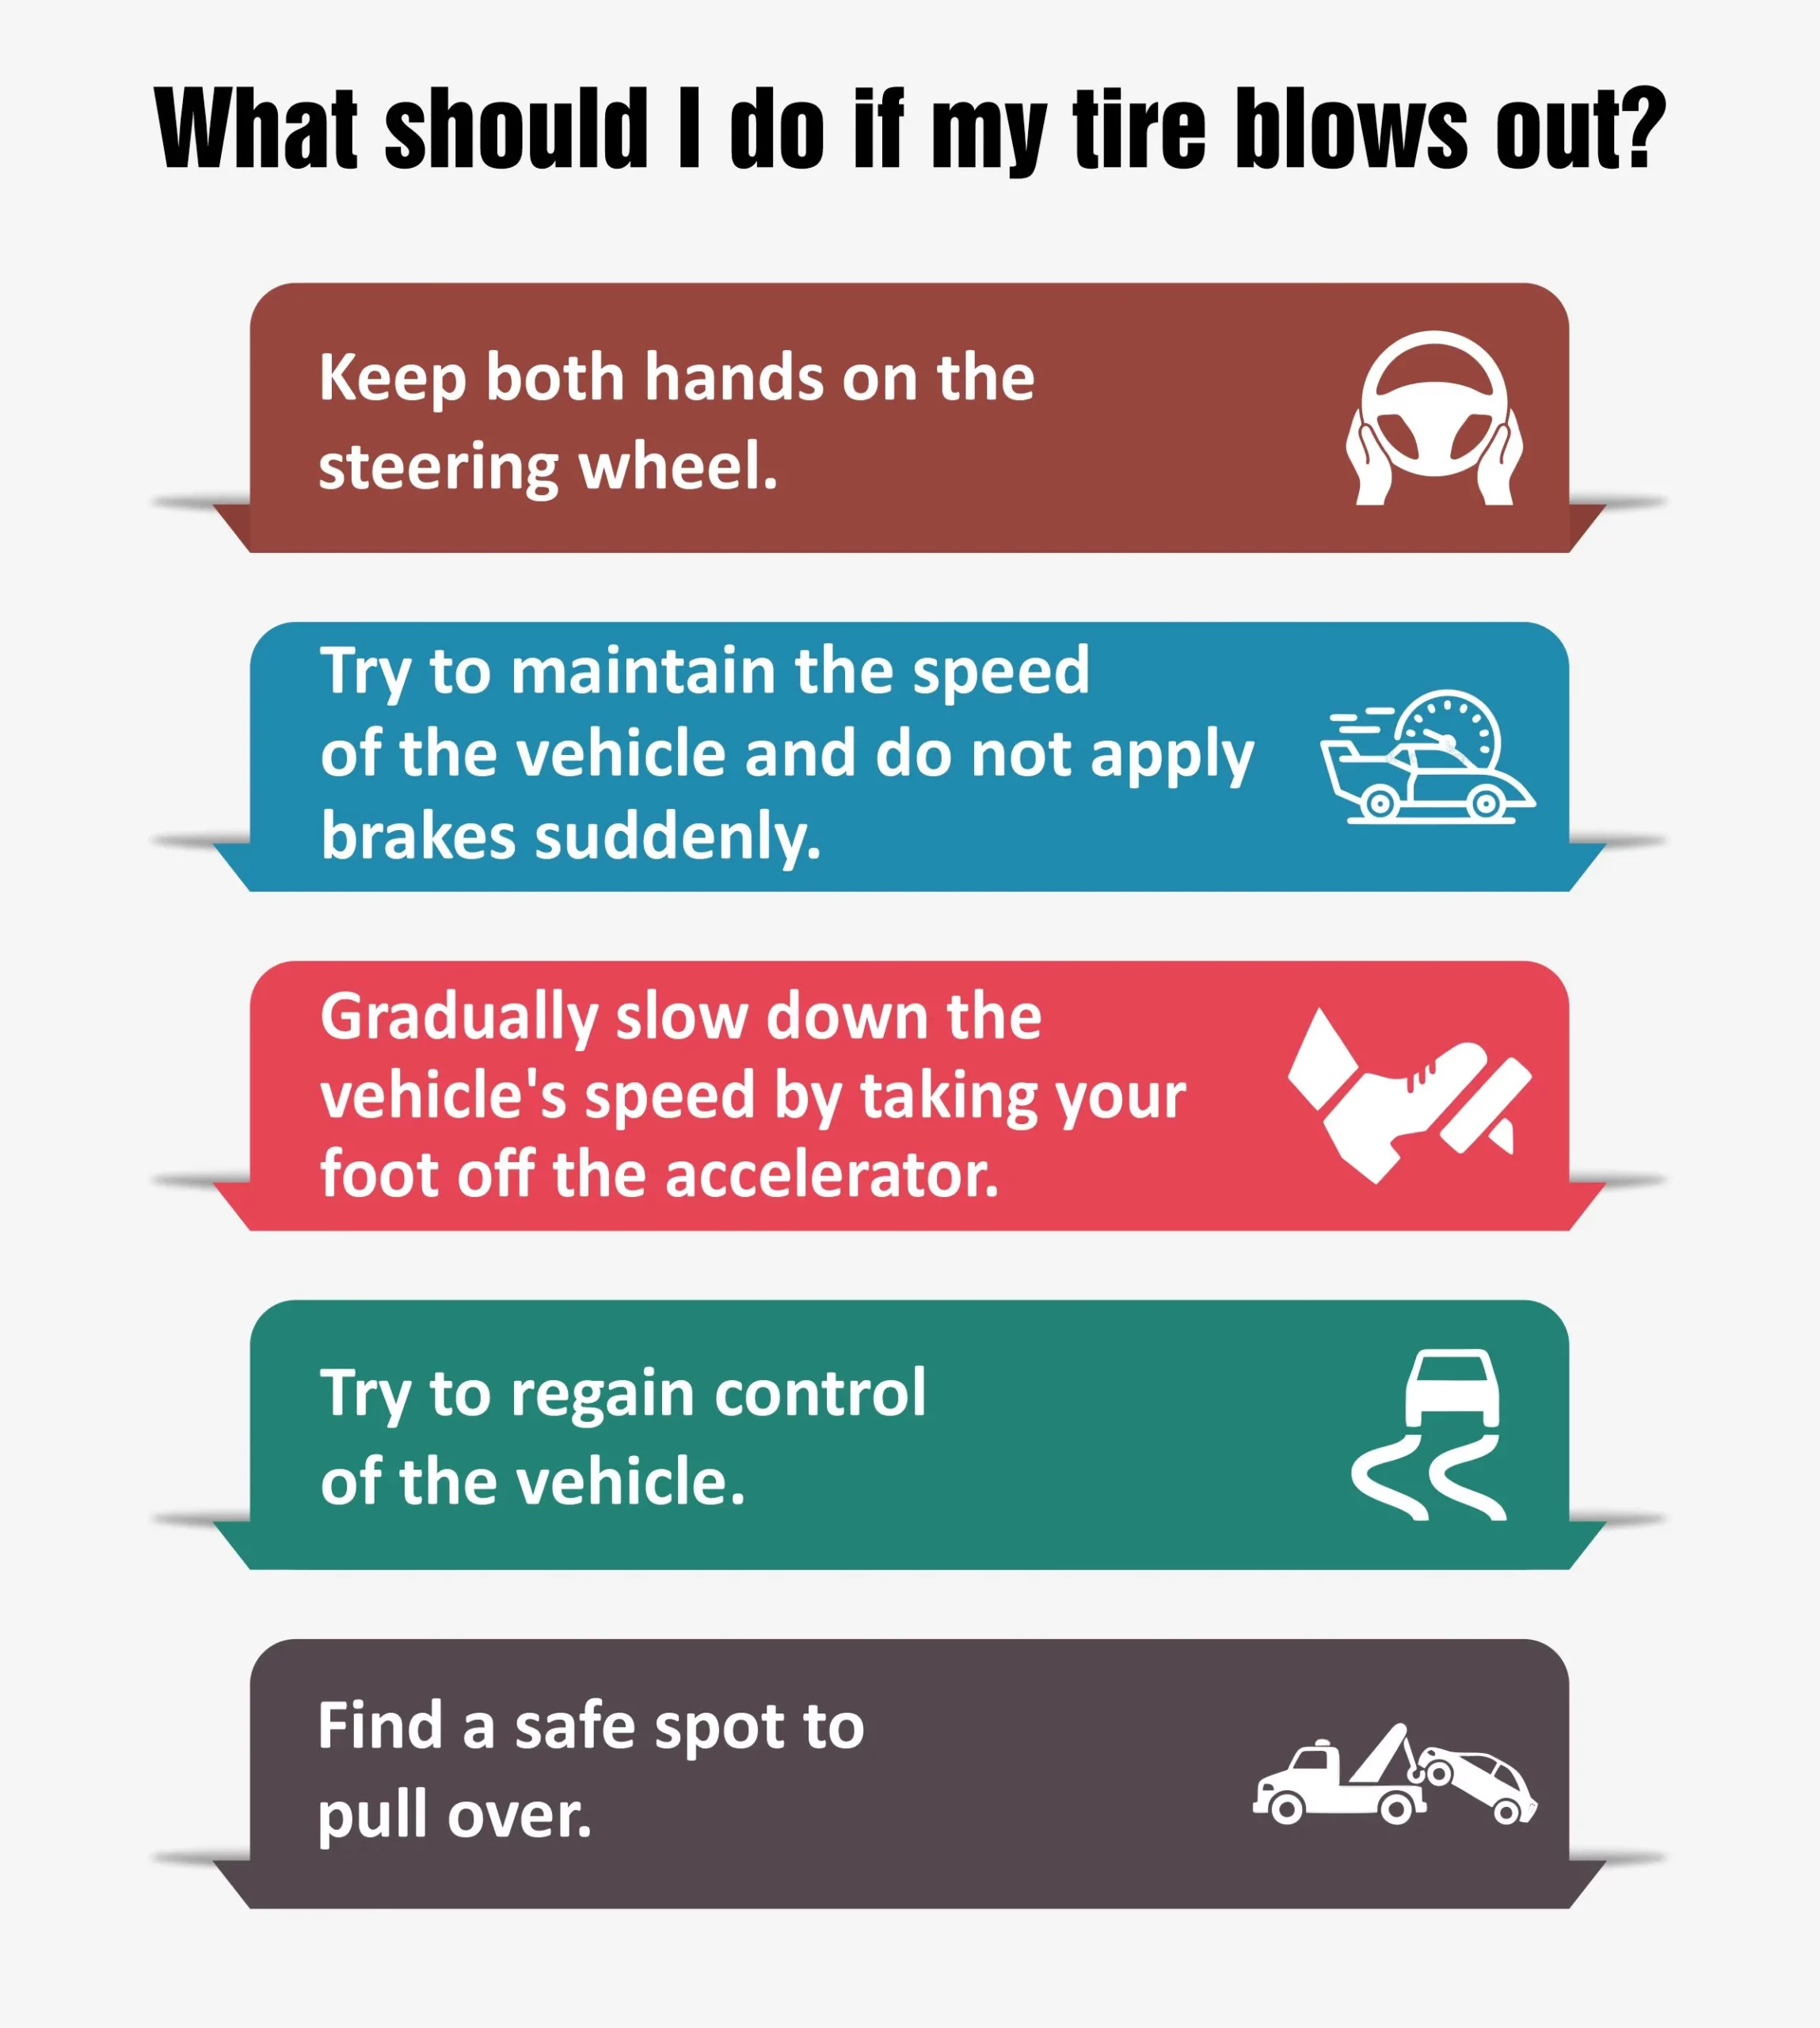 What should I do if my tire blows out